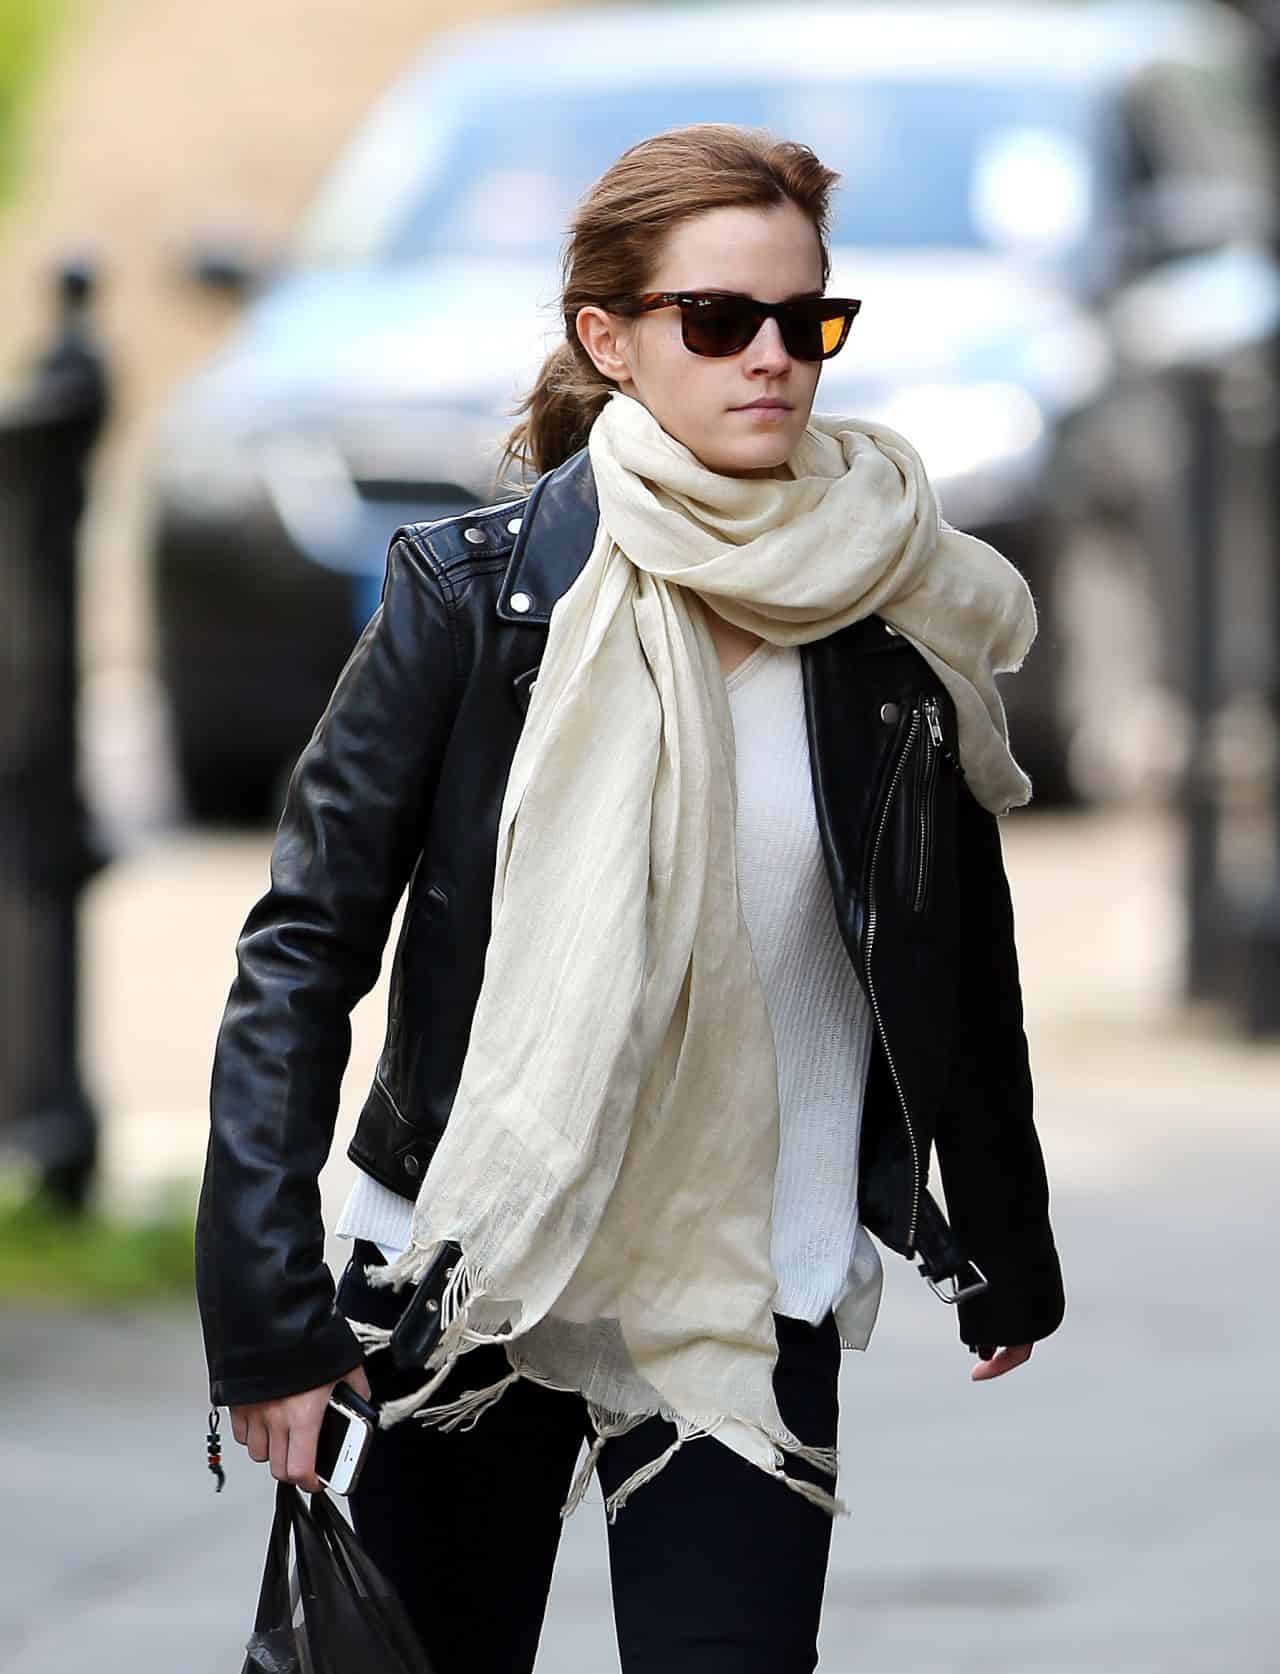 Emma Watson Rocked a Casual but Stylish Look as She Went Shopping in London